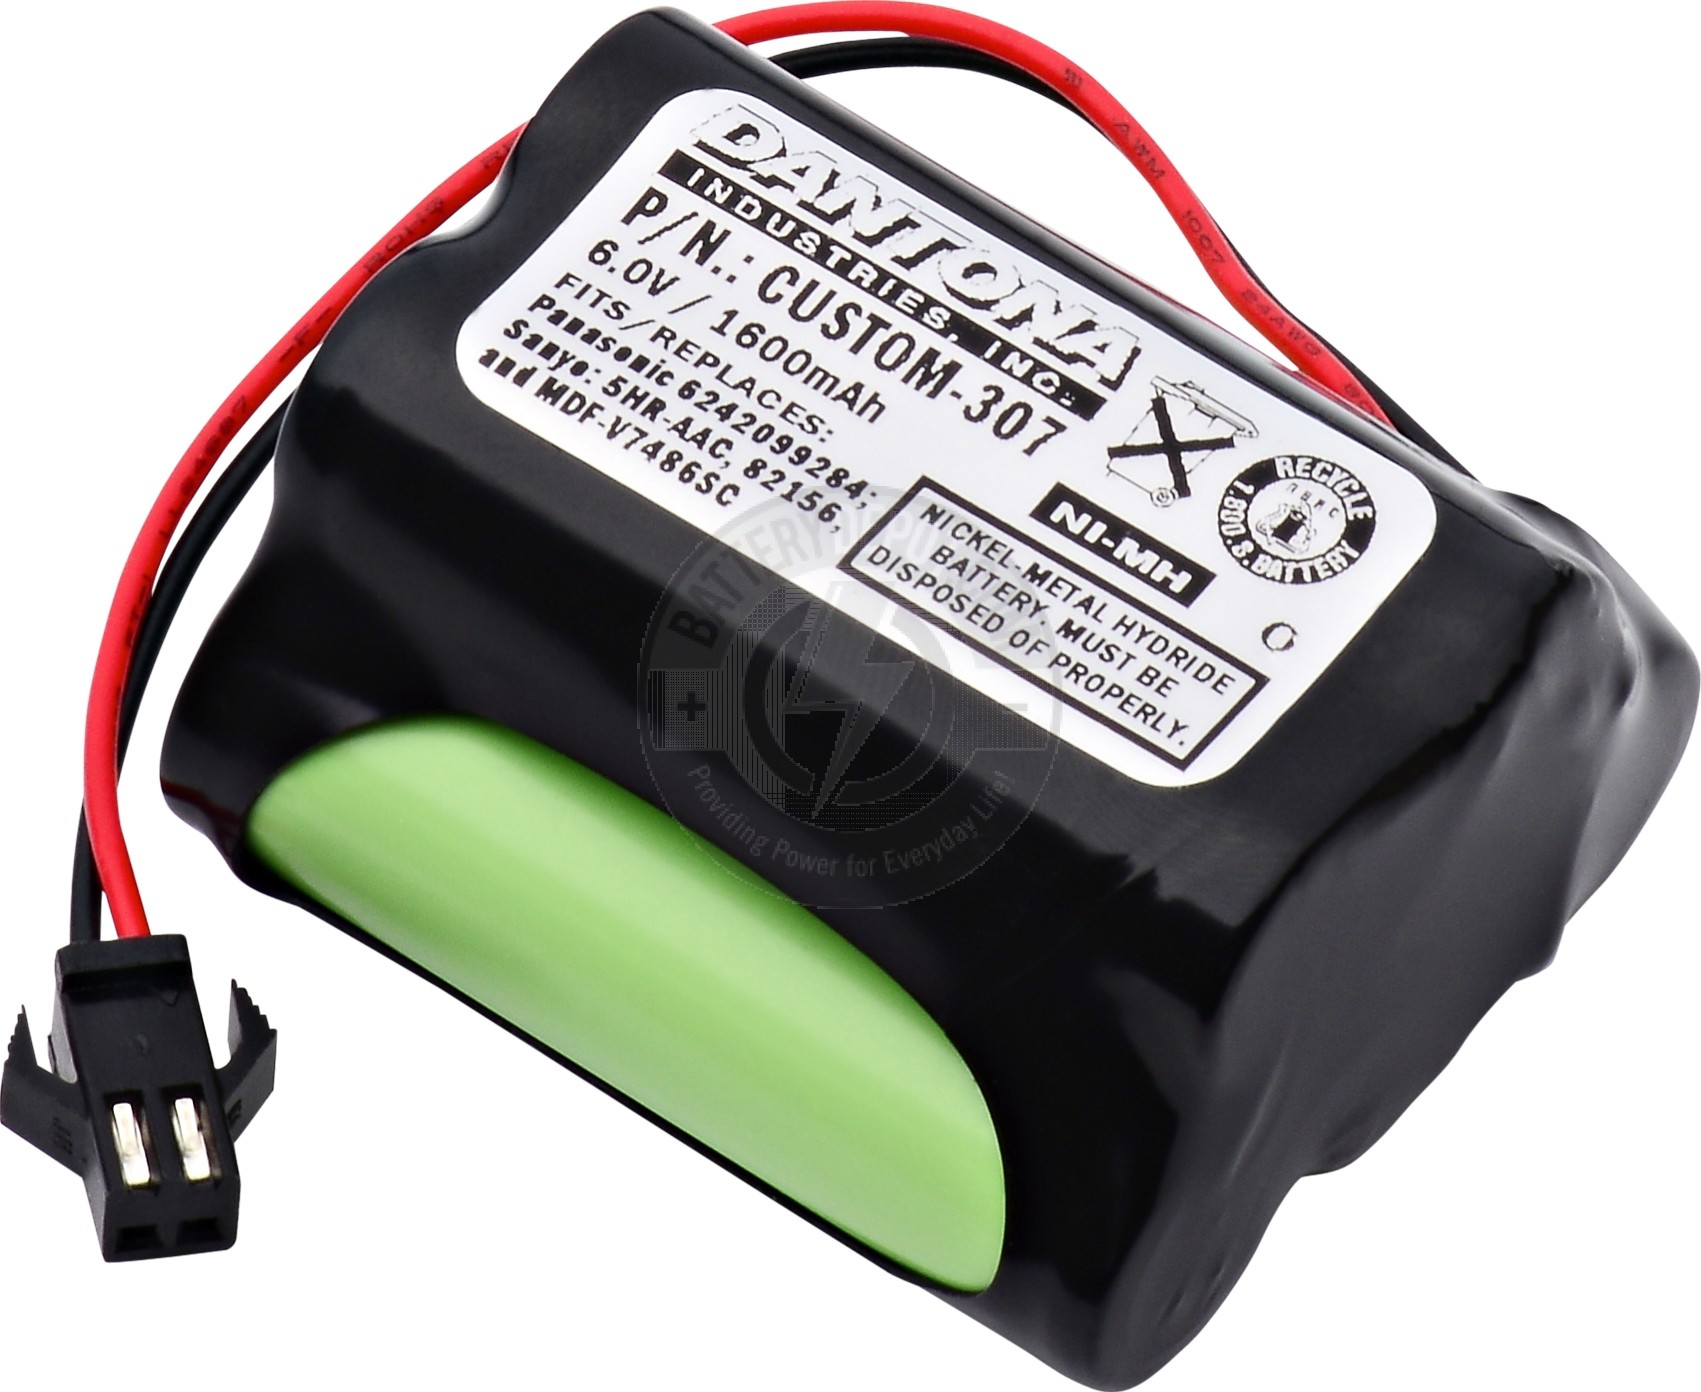 Replacement battery for Sanyo Biomedical Freezer